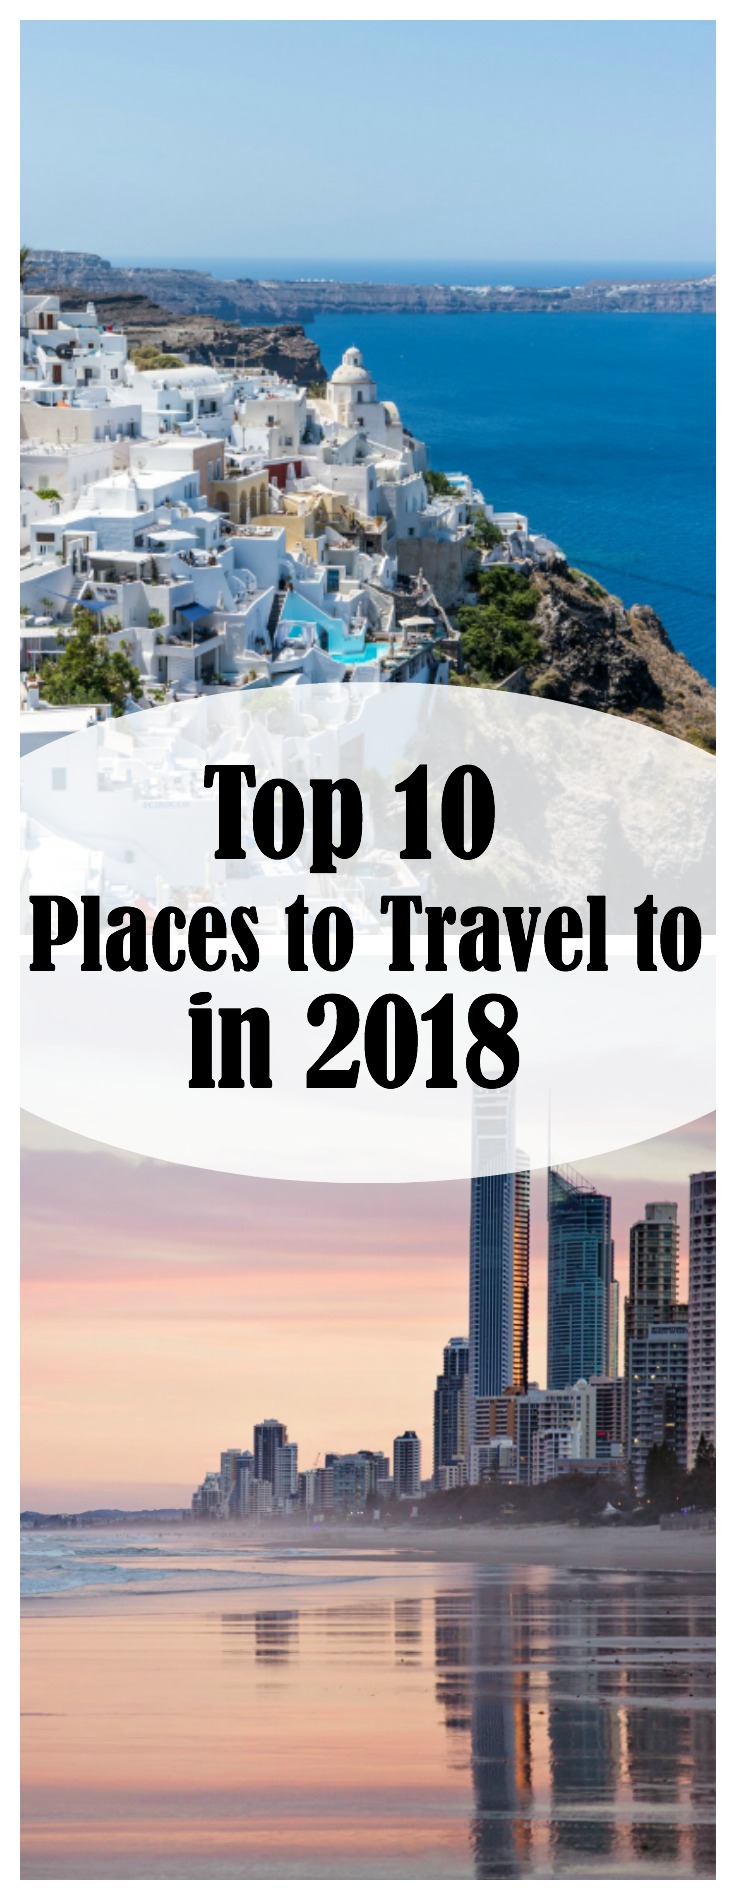 Top 10 Places To Visit in 2018